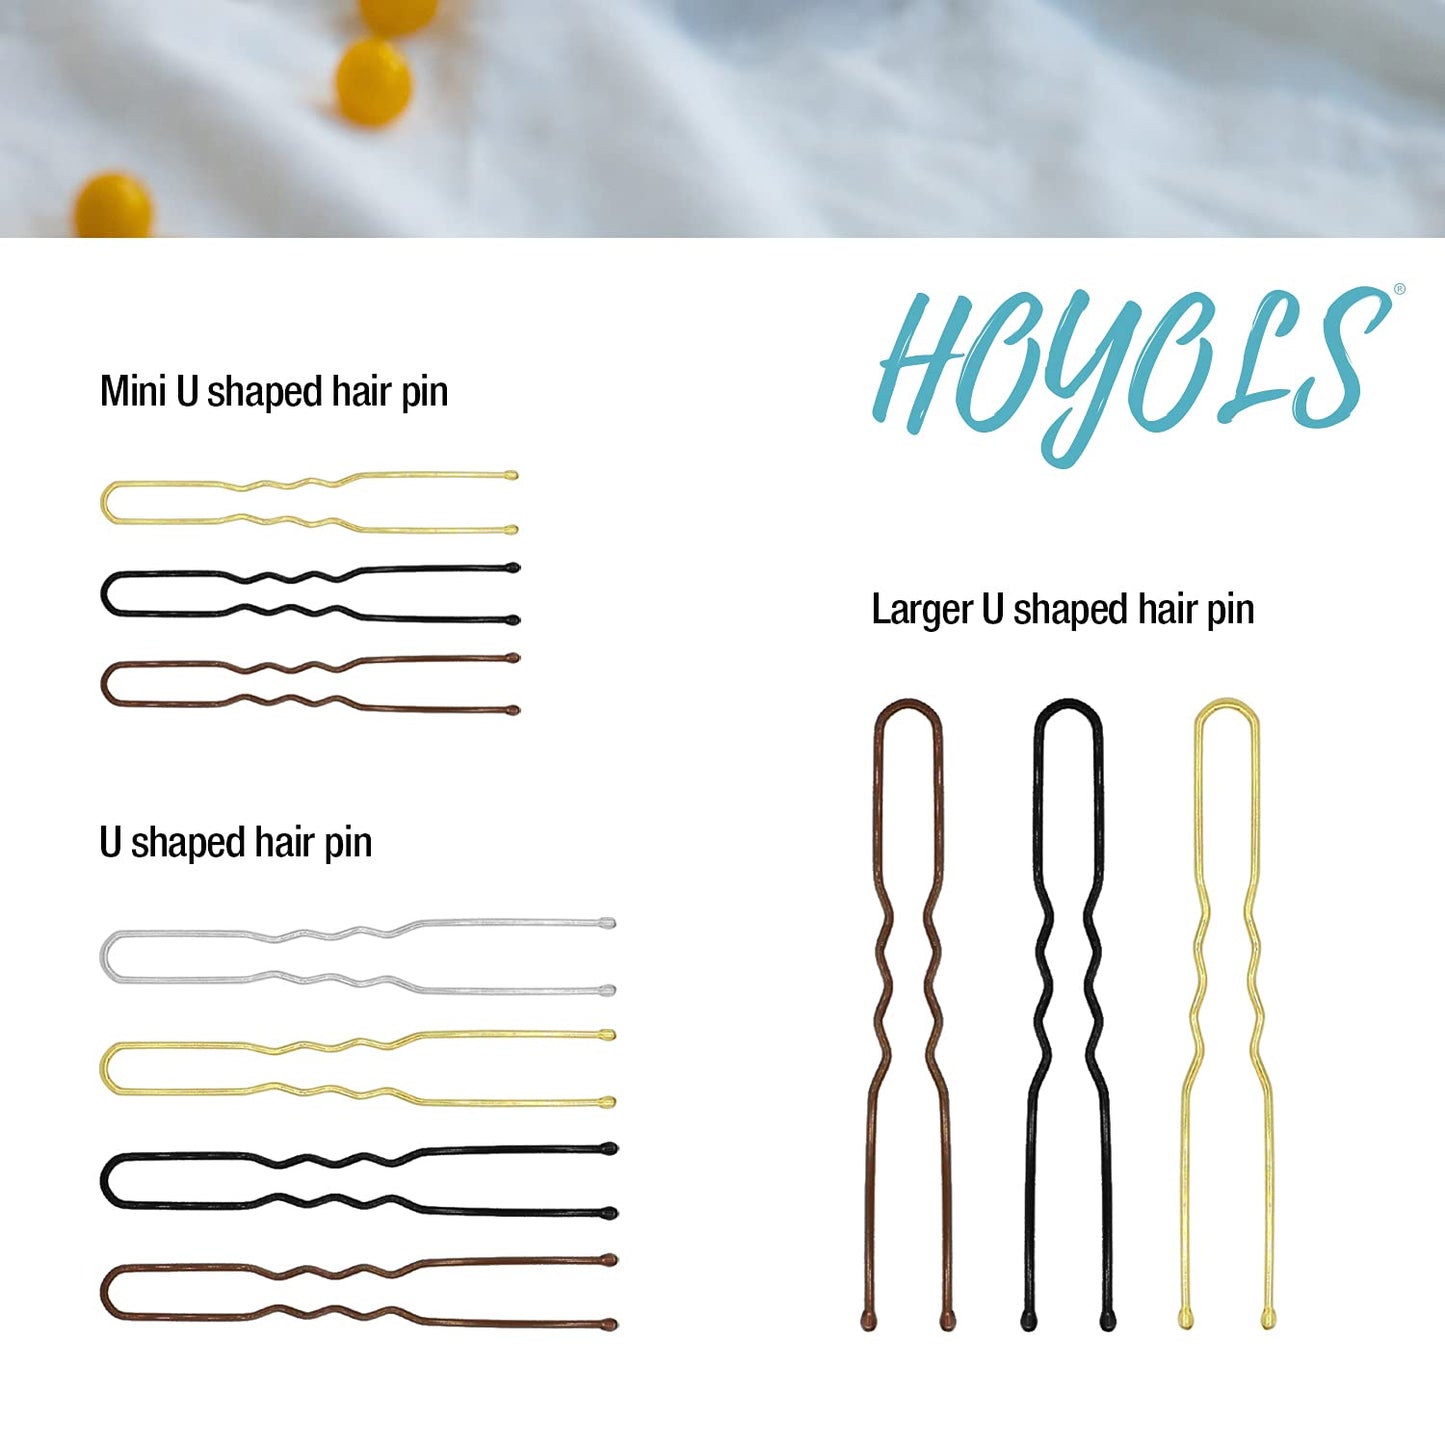 Hoyols U Shaped Hair Pins Brown, Assorted Size U Shape Bobby Pins, Metal Curved Curly Bun Clips Hairpin Crimped Design with Ball Tips for Buns Women Girls Grips Hairstyle Updo Thin Thick Hair Gold, 150 Count Bulk Pack (Brown)